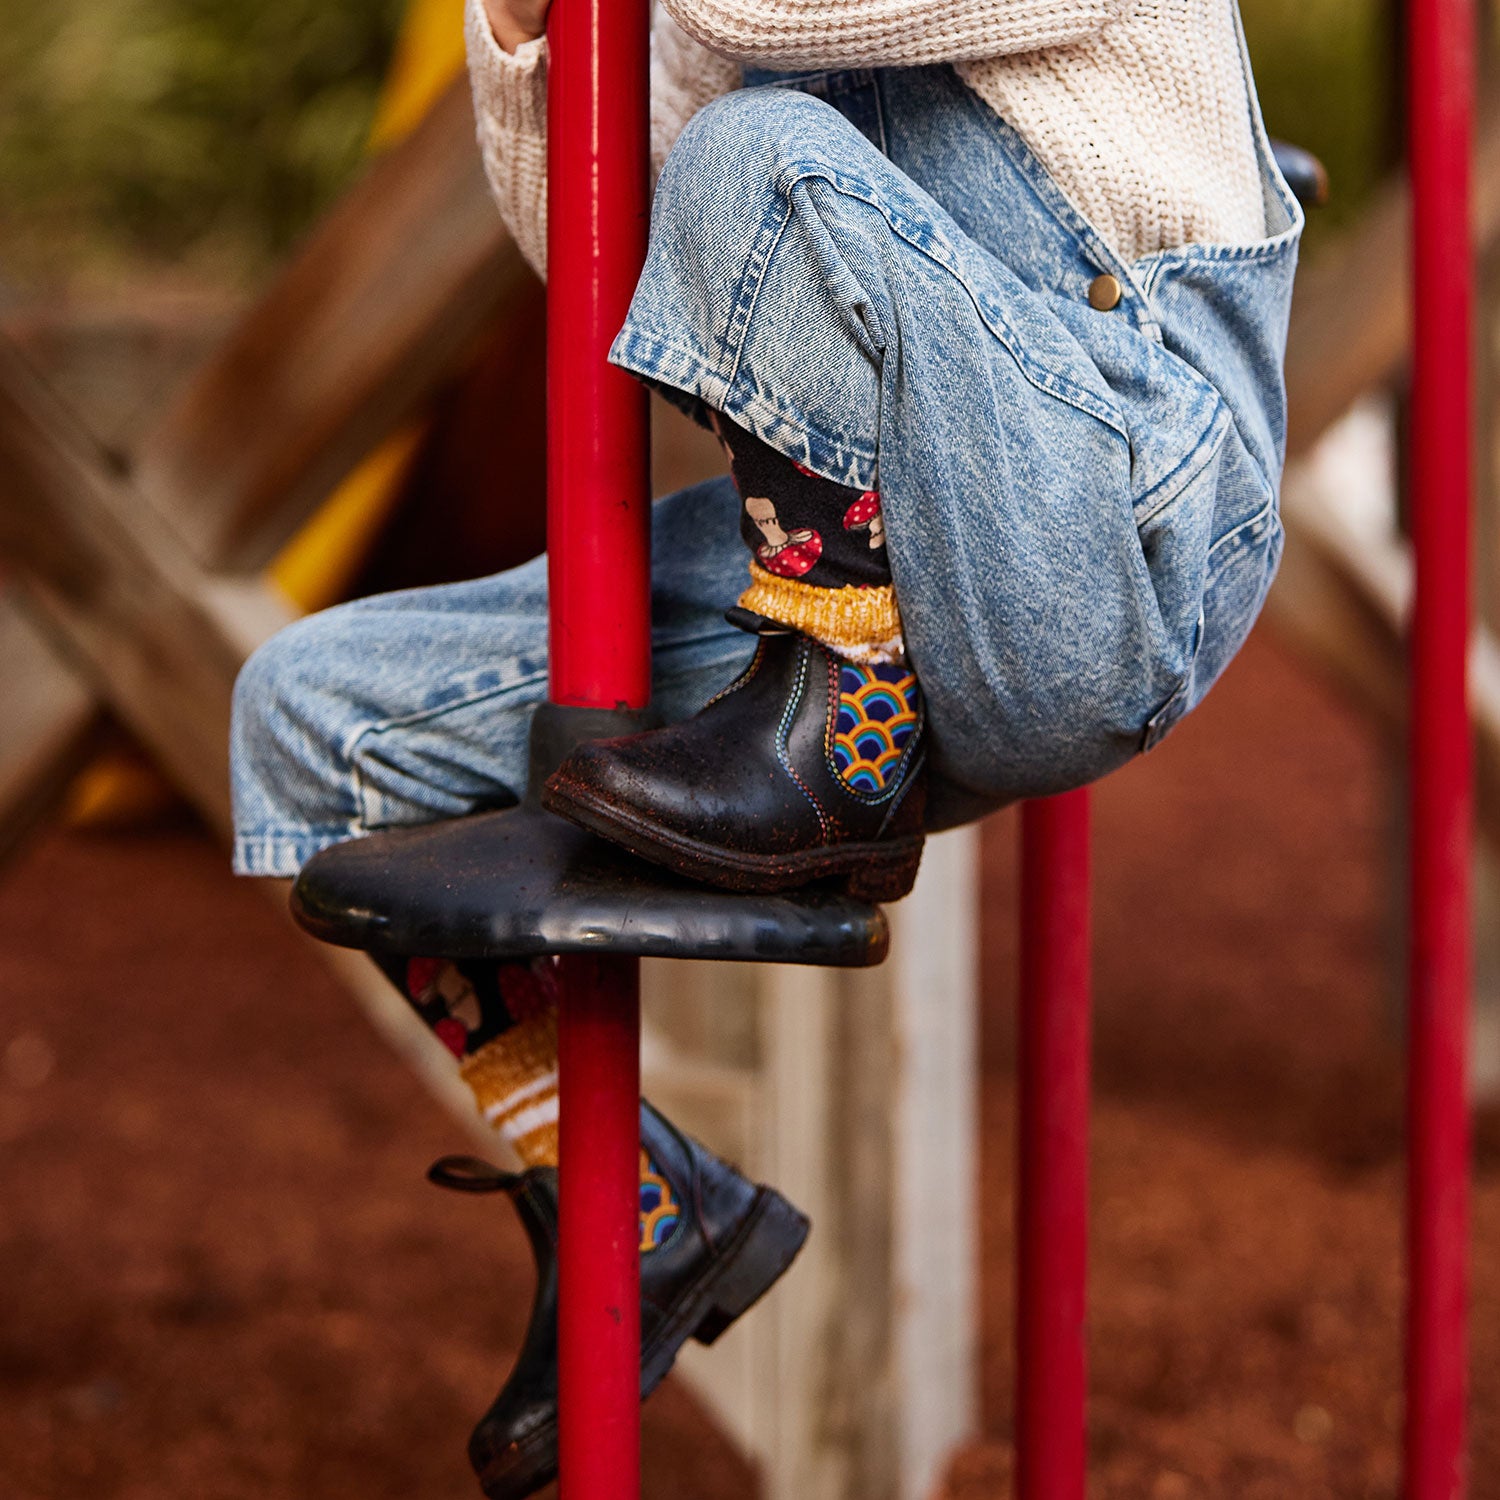 Blundstone 2254 Kids Black with Rainbow Elastic and Contrast Stitching on the playground